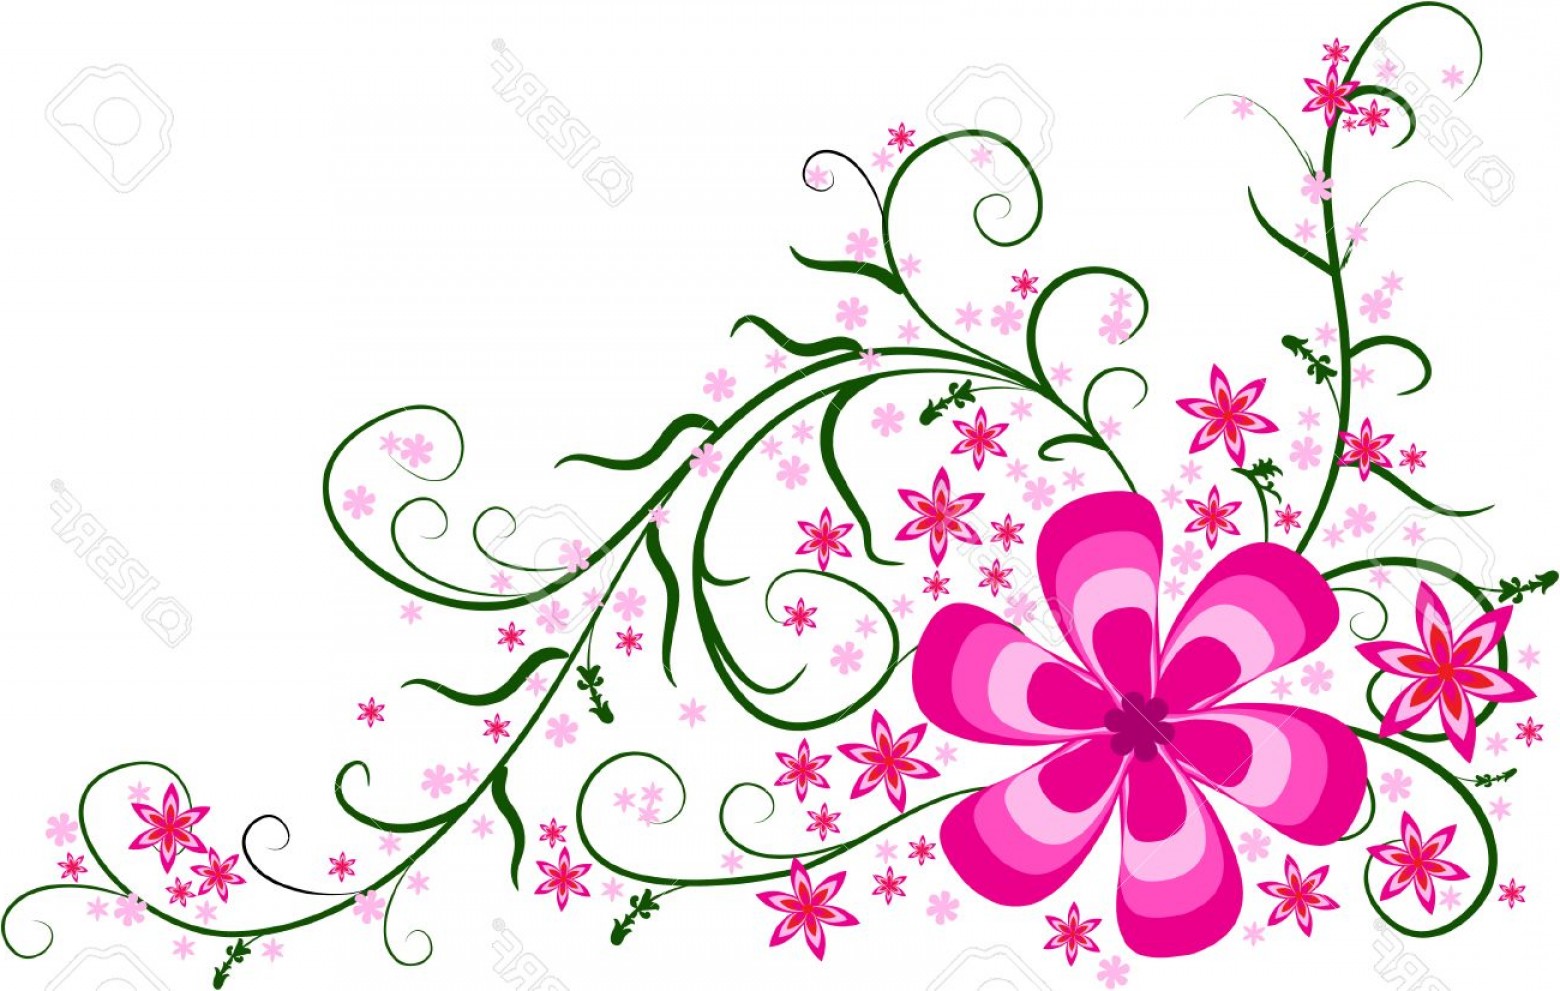 Download Floral Corner Vector at Vectorified.com | Collection of ...